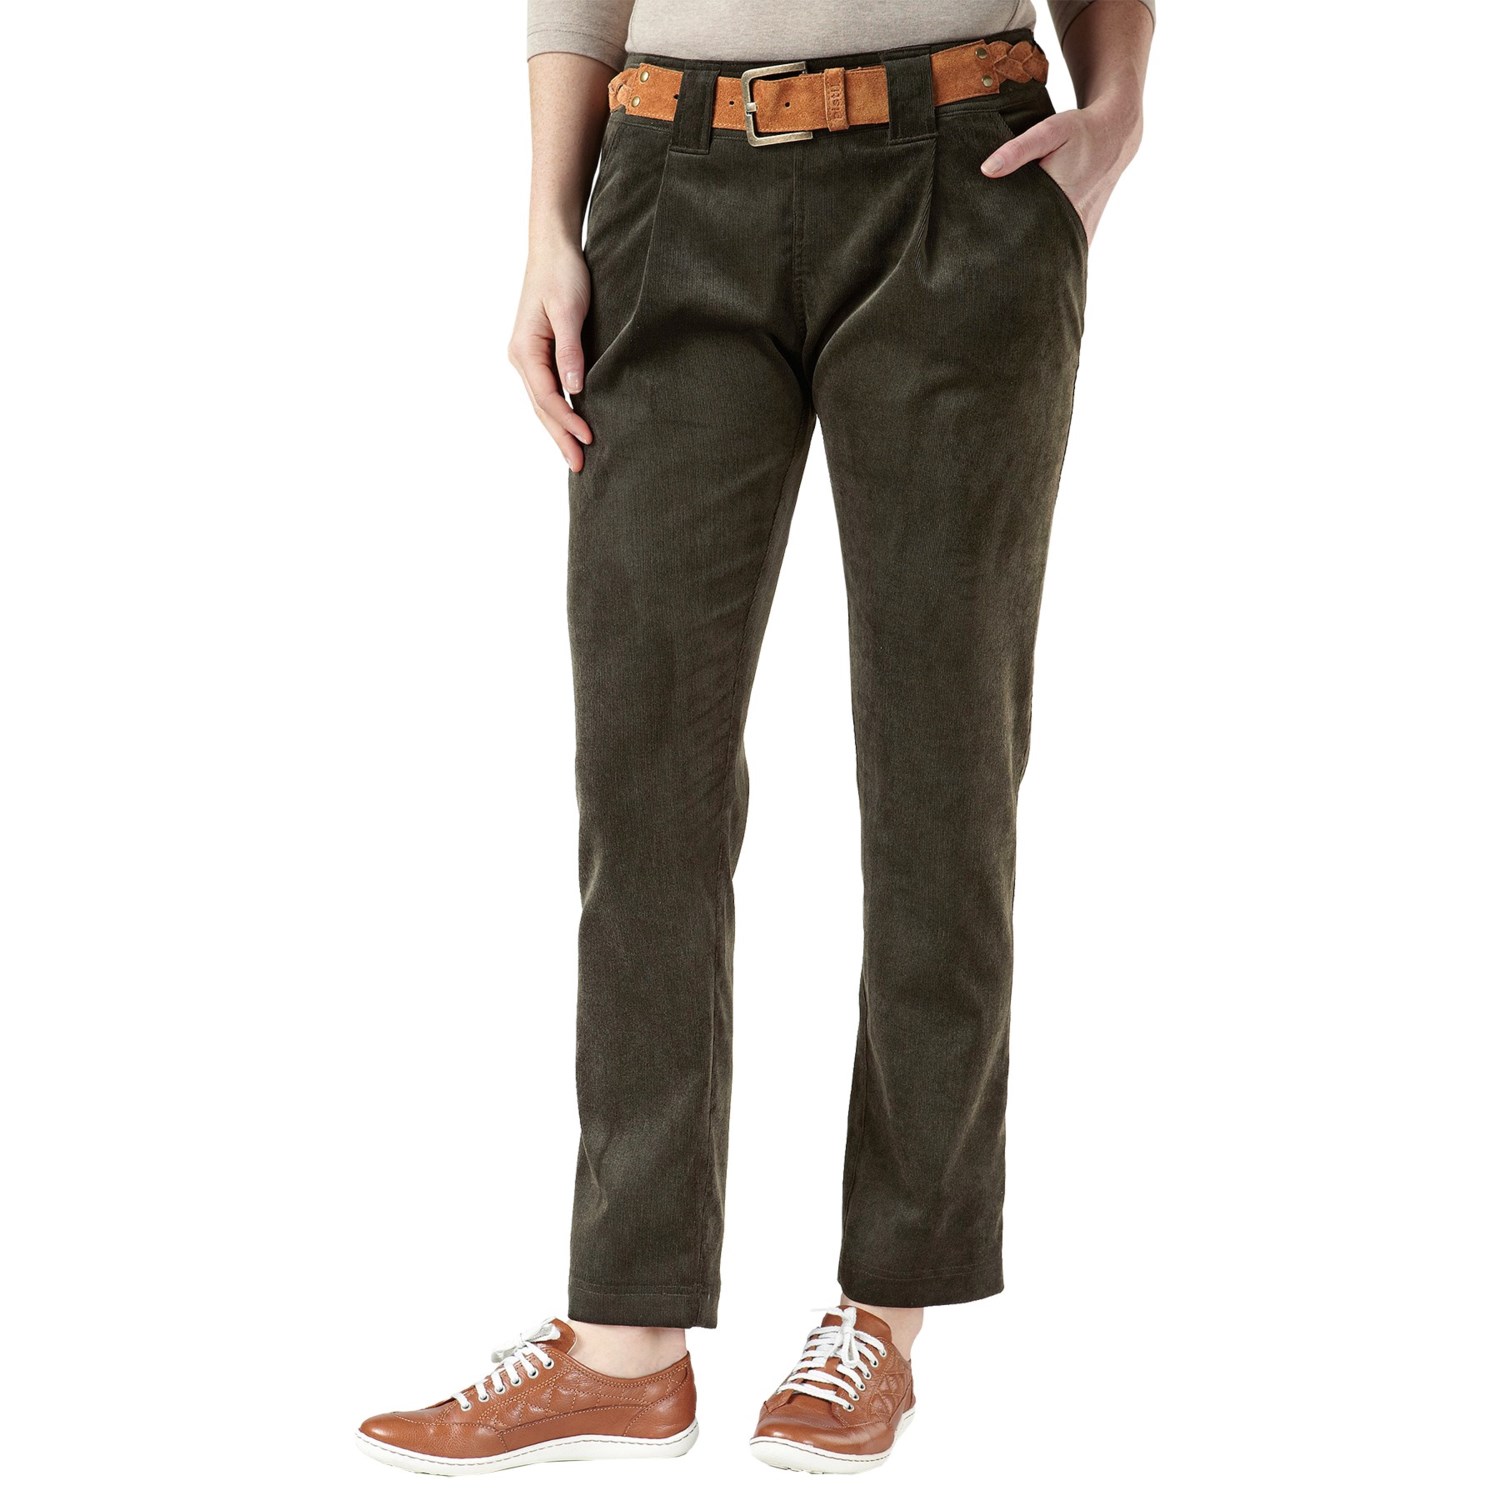 Royal Robbins Cafe Cord Ankle Pants (For Women) - Save 84%